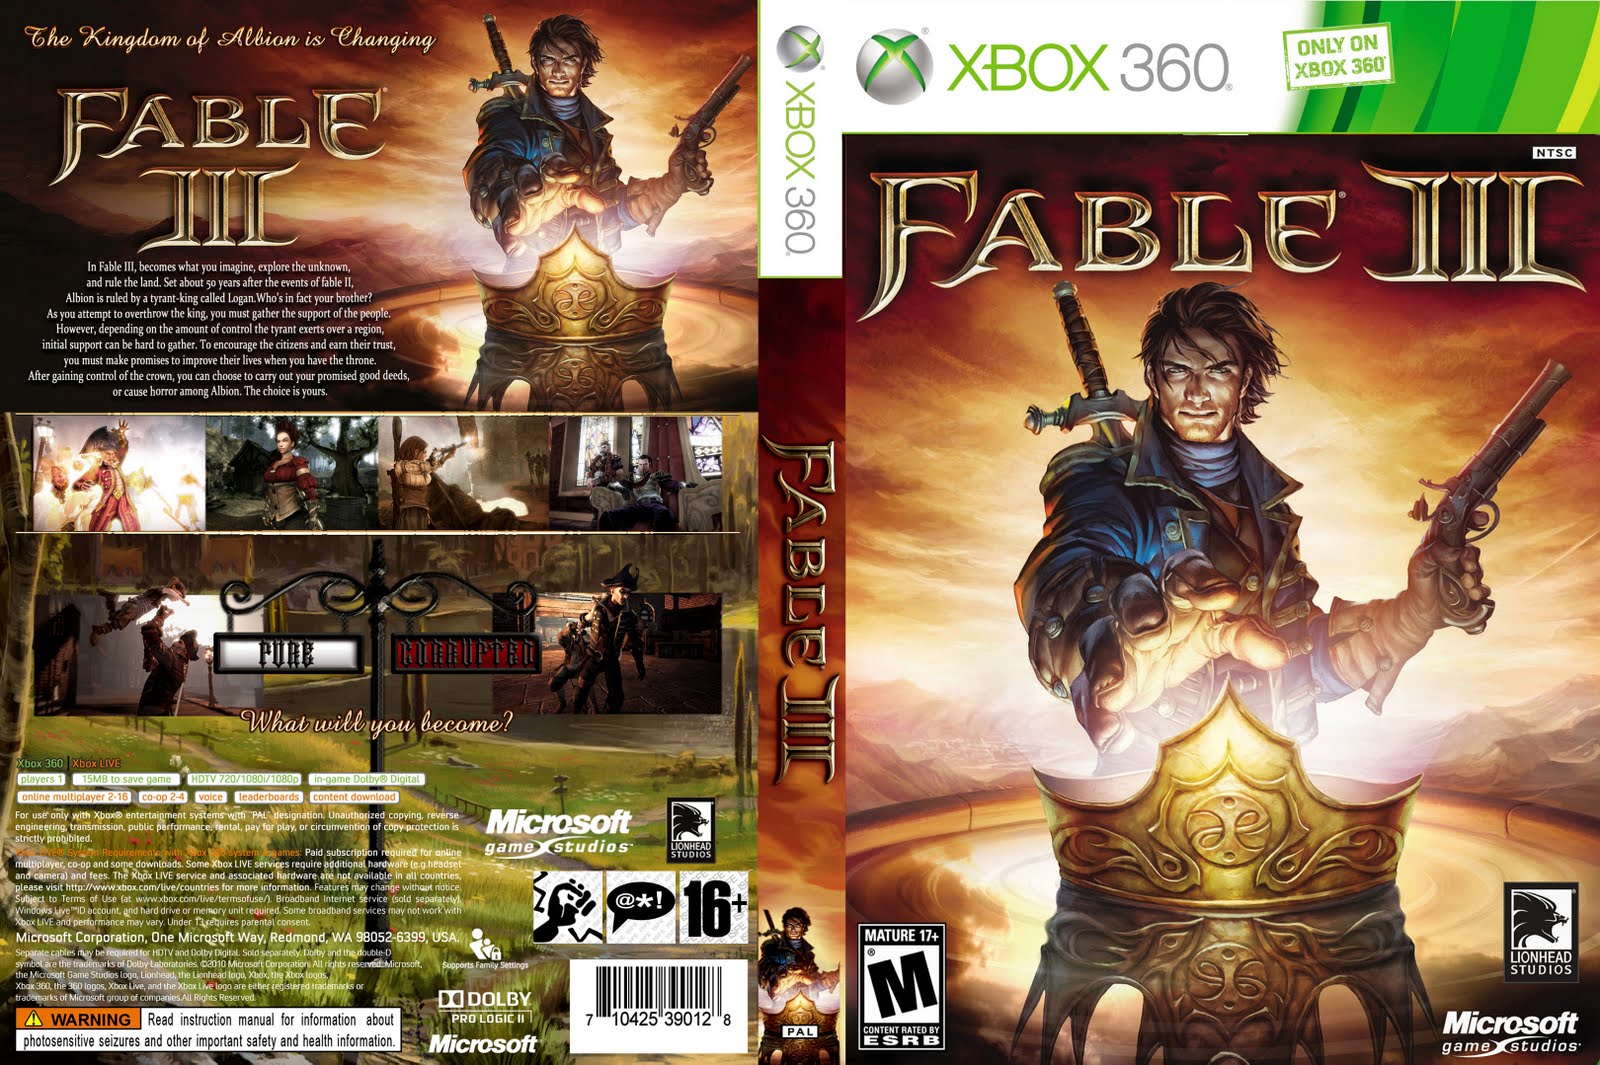 Fable 3 Computer Game - Fable III PC Game Download Free Full Version ...